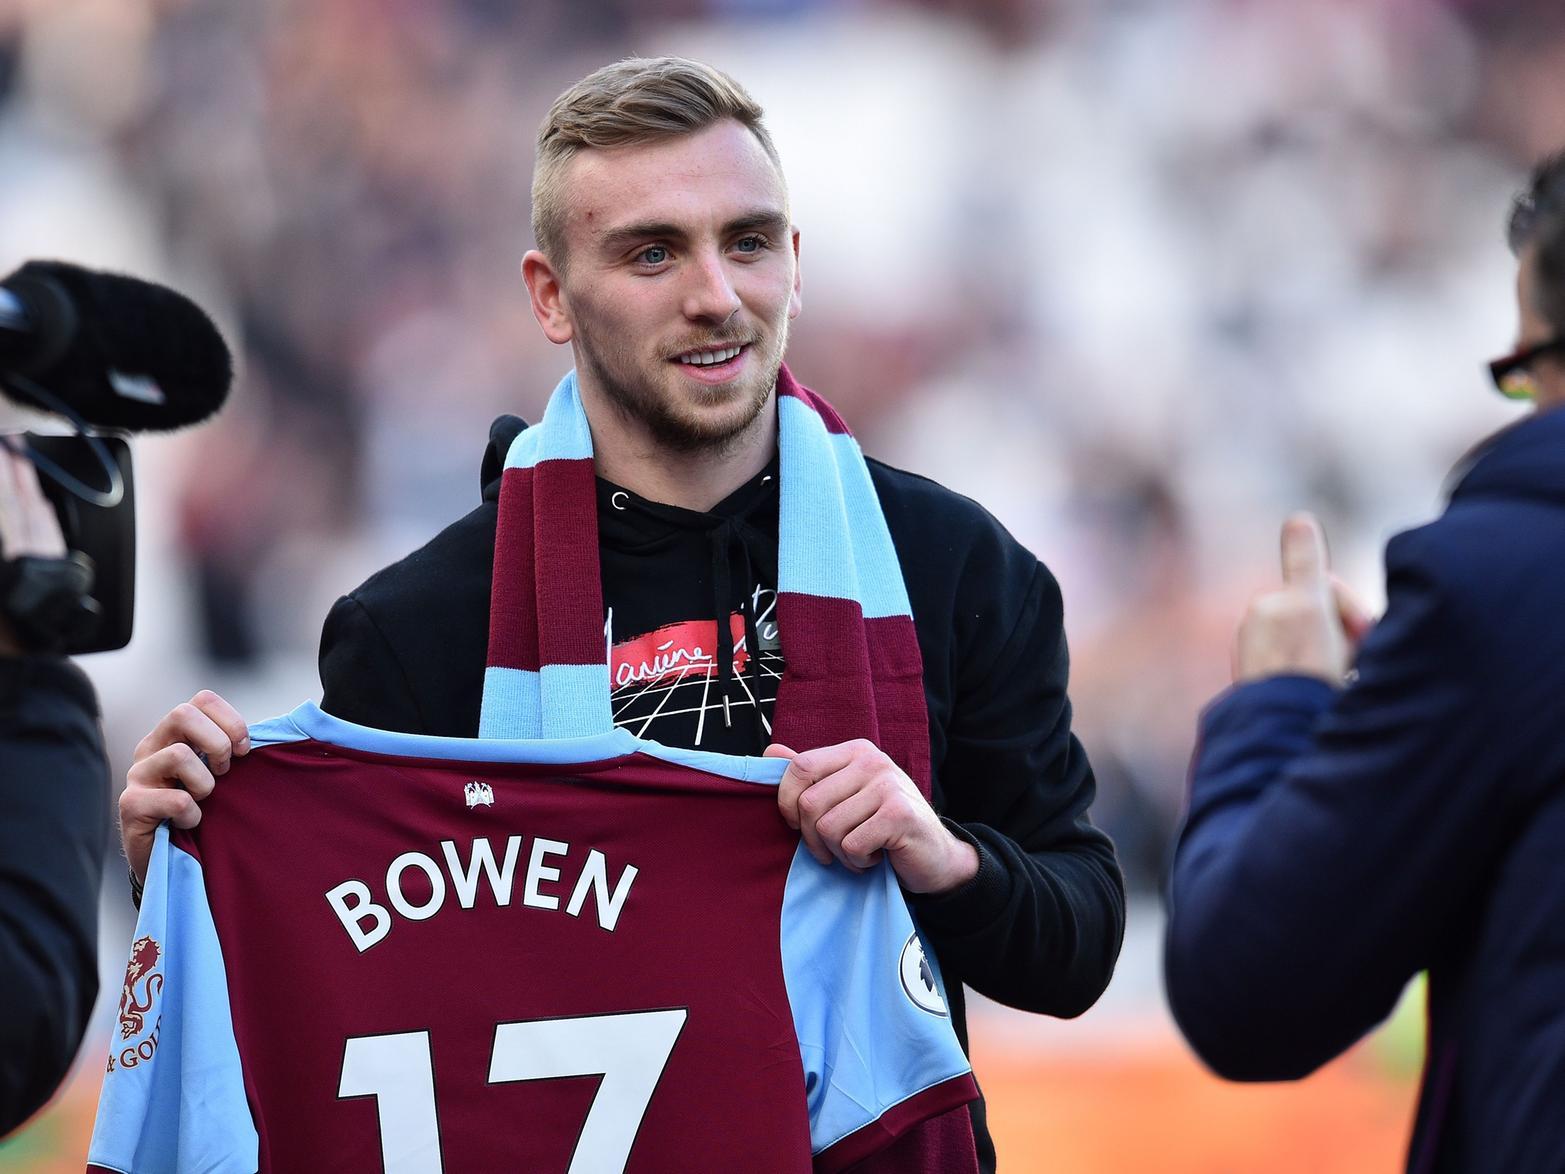 West Ham United new boy Jarrod Bowen has described joining the club as a "massive honour", and is desperate to prove himself on the big stage in the Premier League. (Hull Daily Mail)